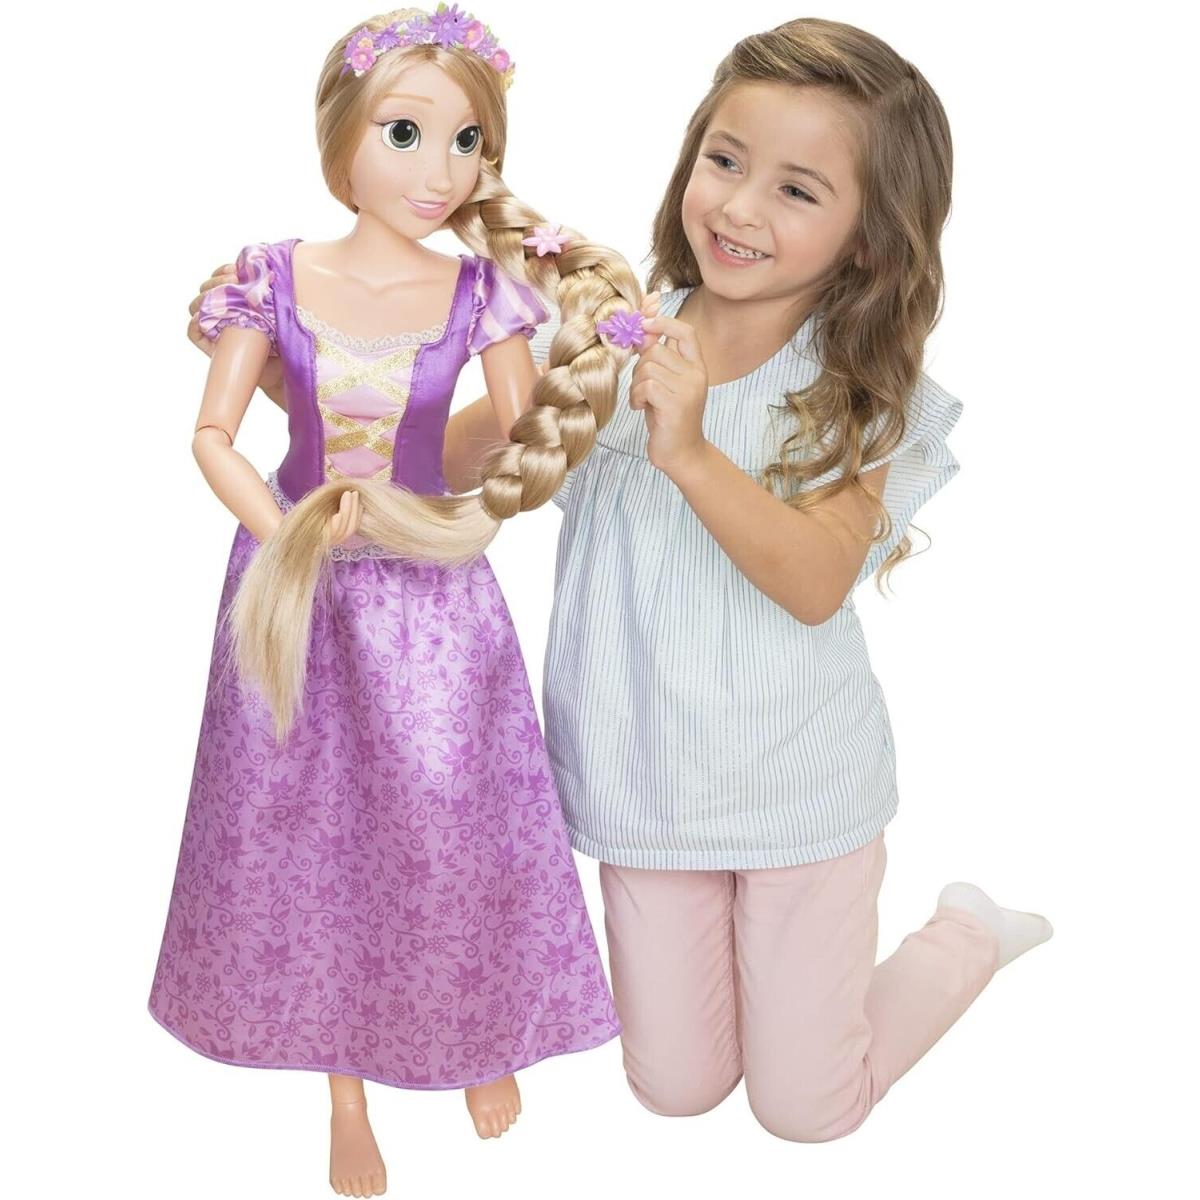 Disney Princess Playdate Rapunzel 32 Doll with Brush to Comb Her Golden Hair